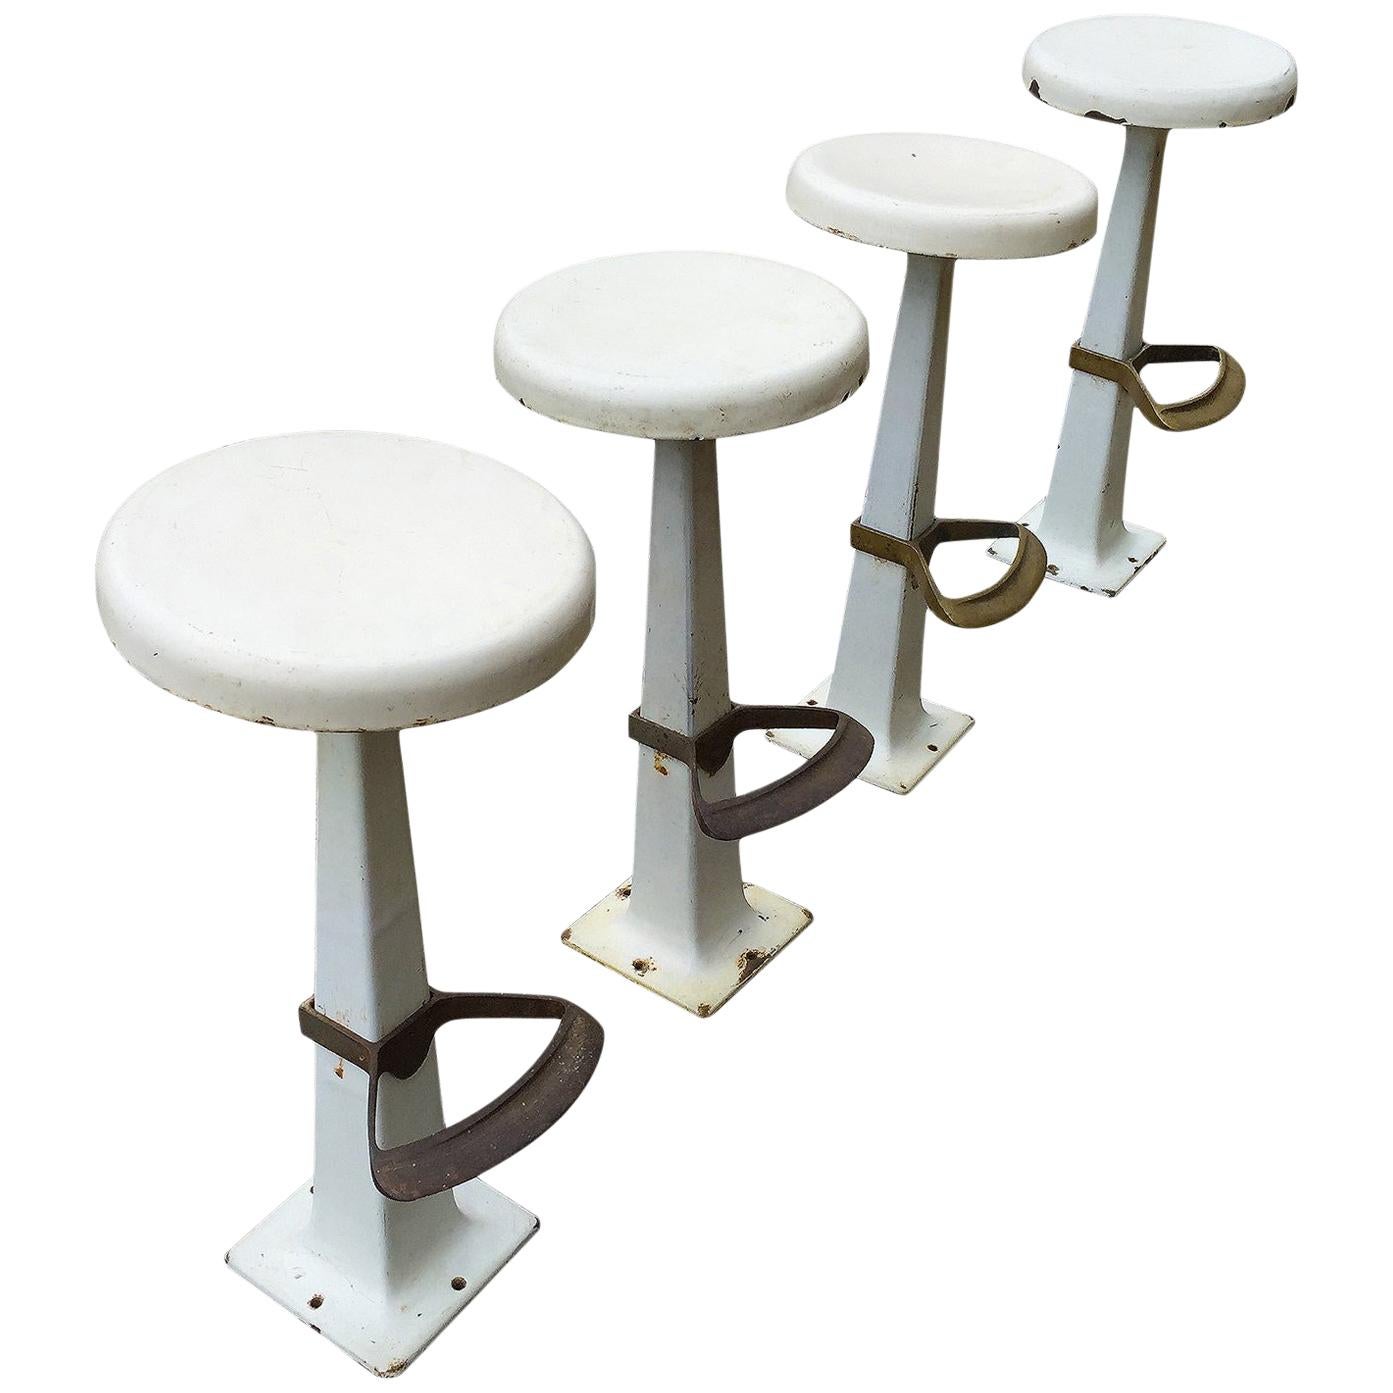 Group of Four White Stools with Footrest, circa 1930